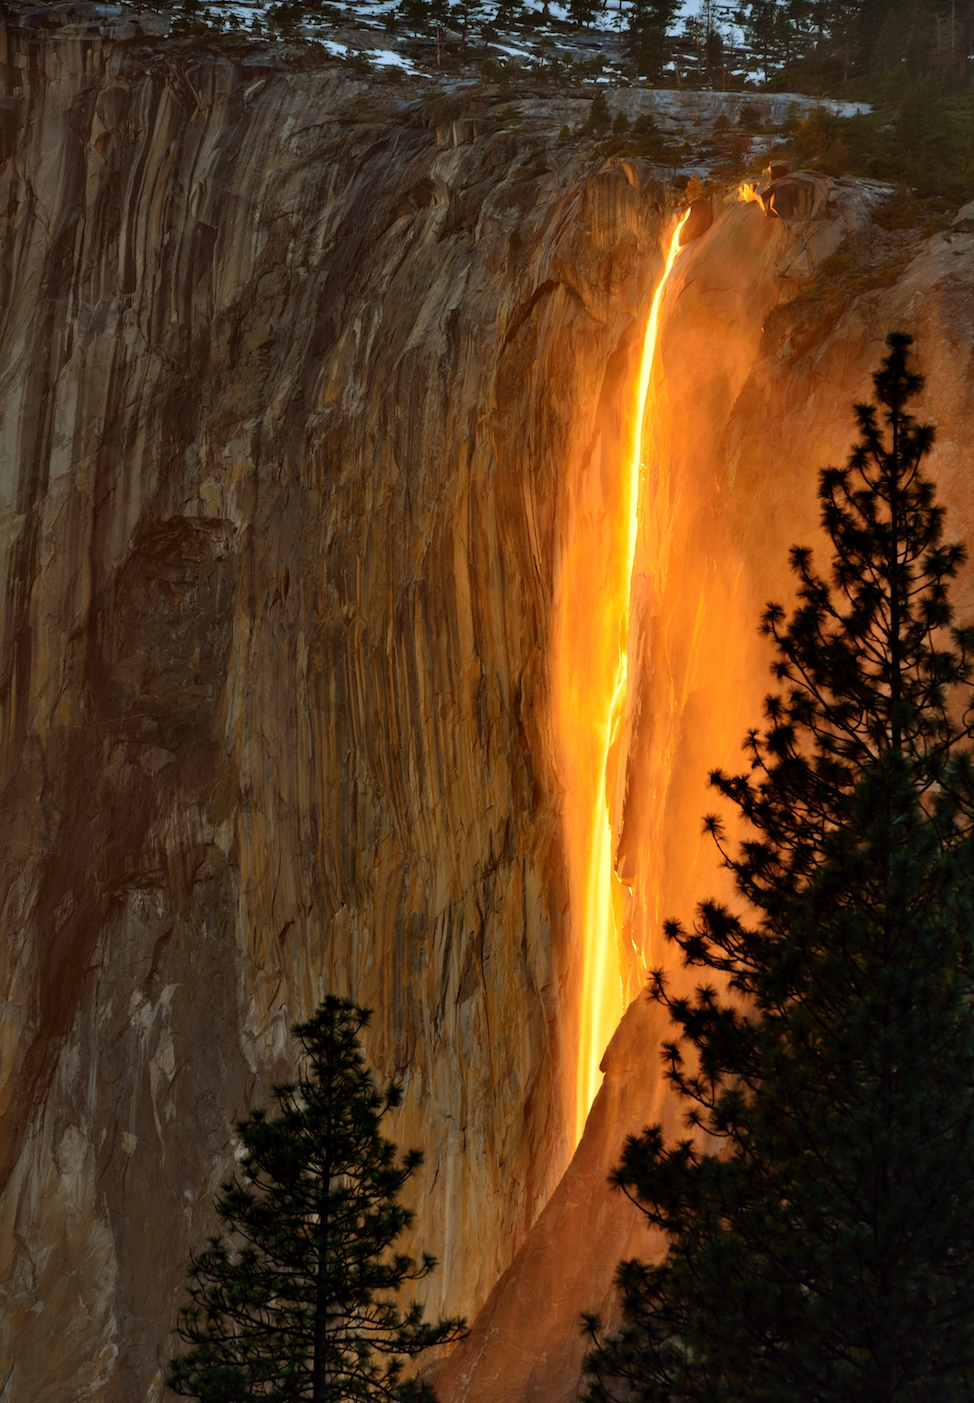 A waterfall glows orange down the side of a granite formation.